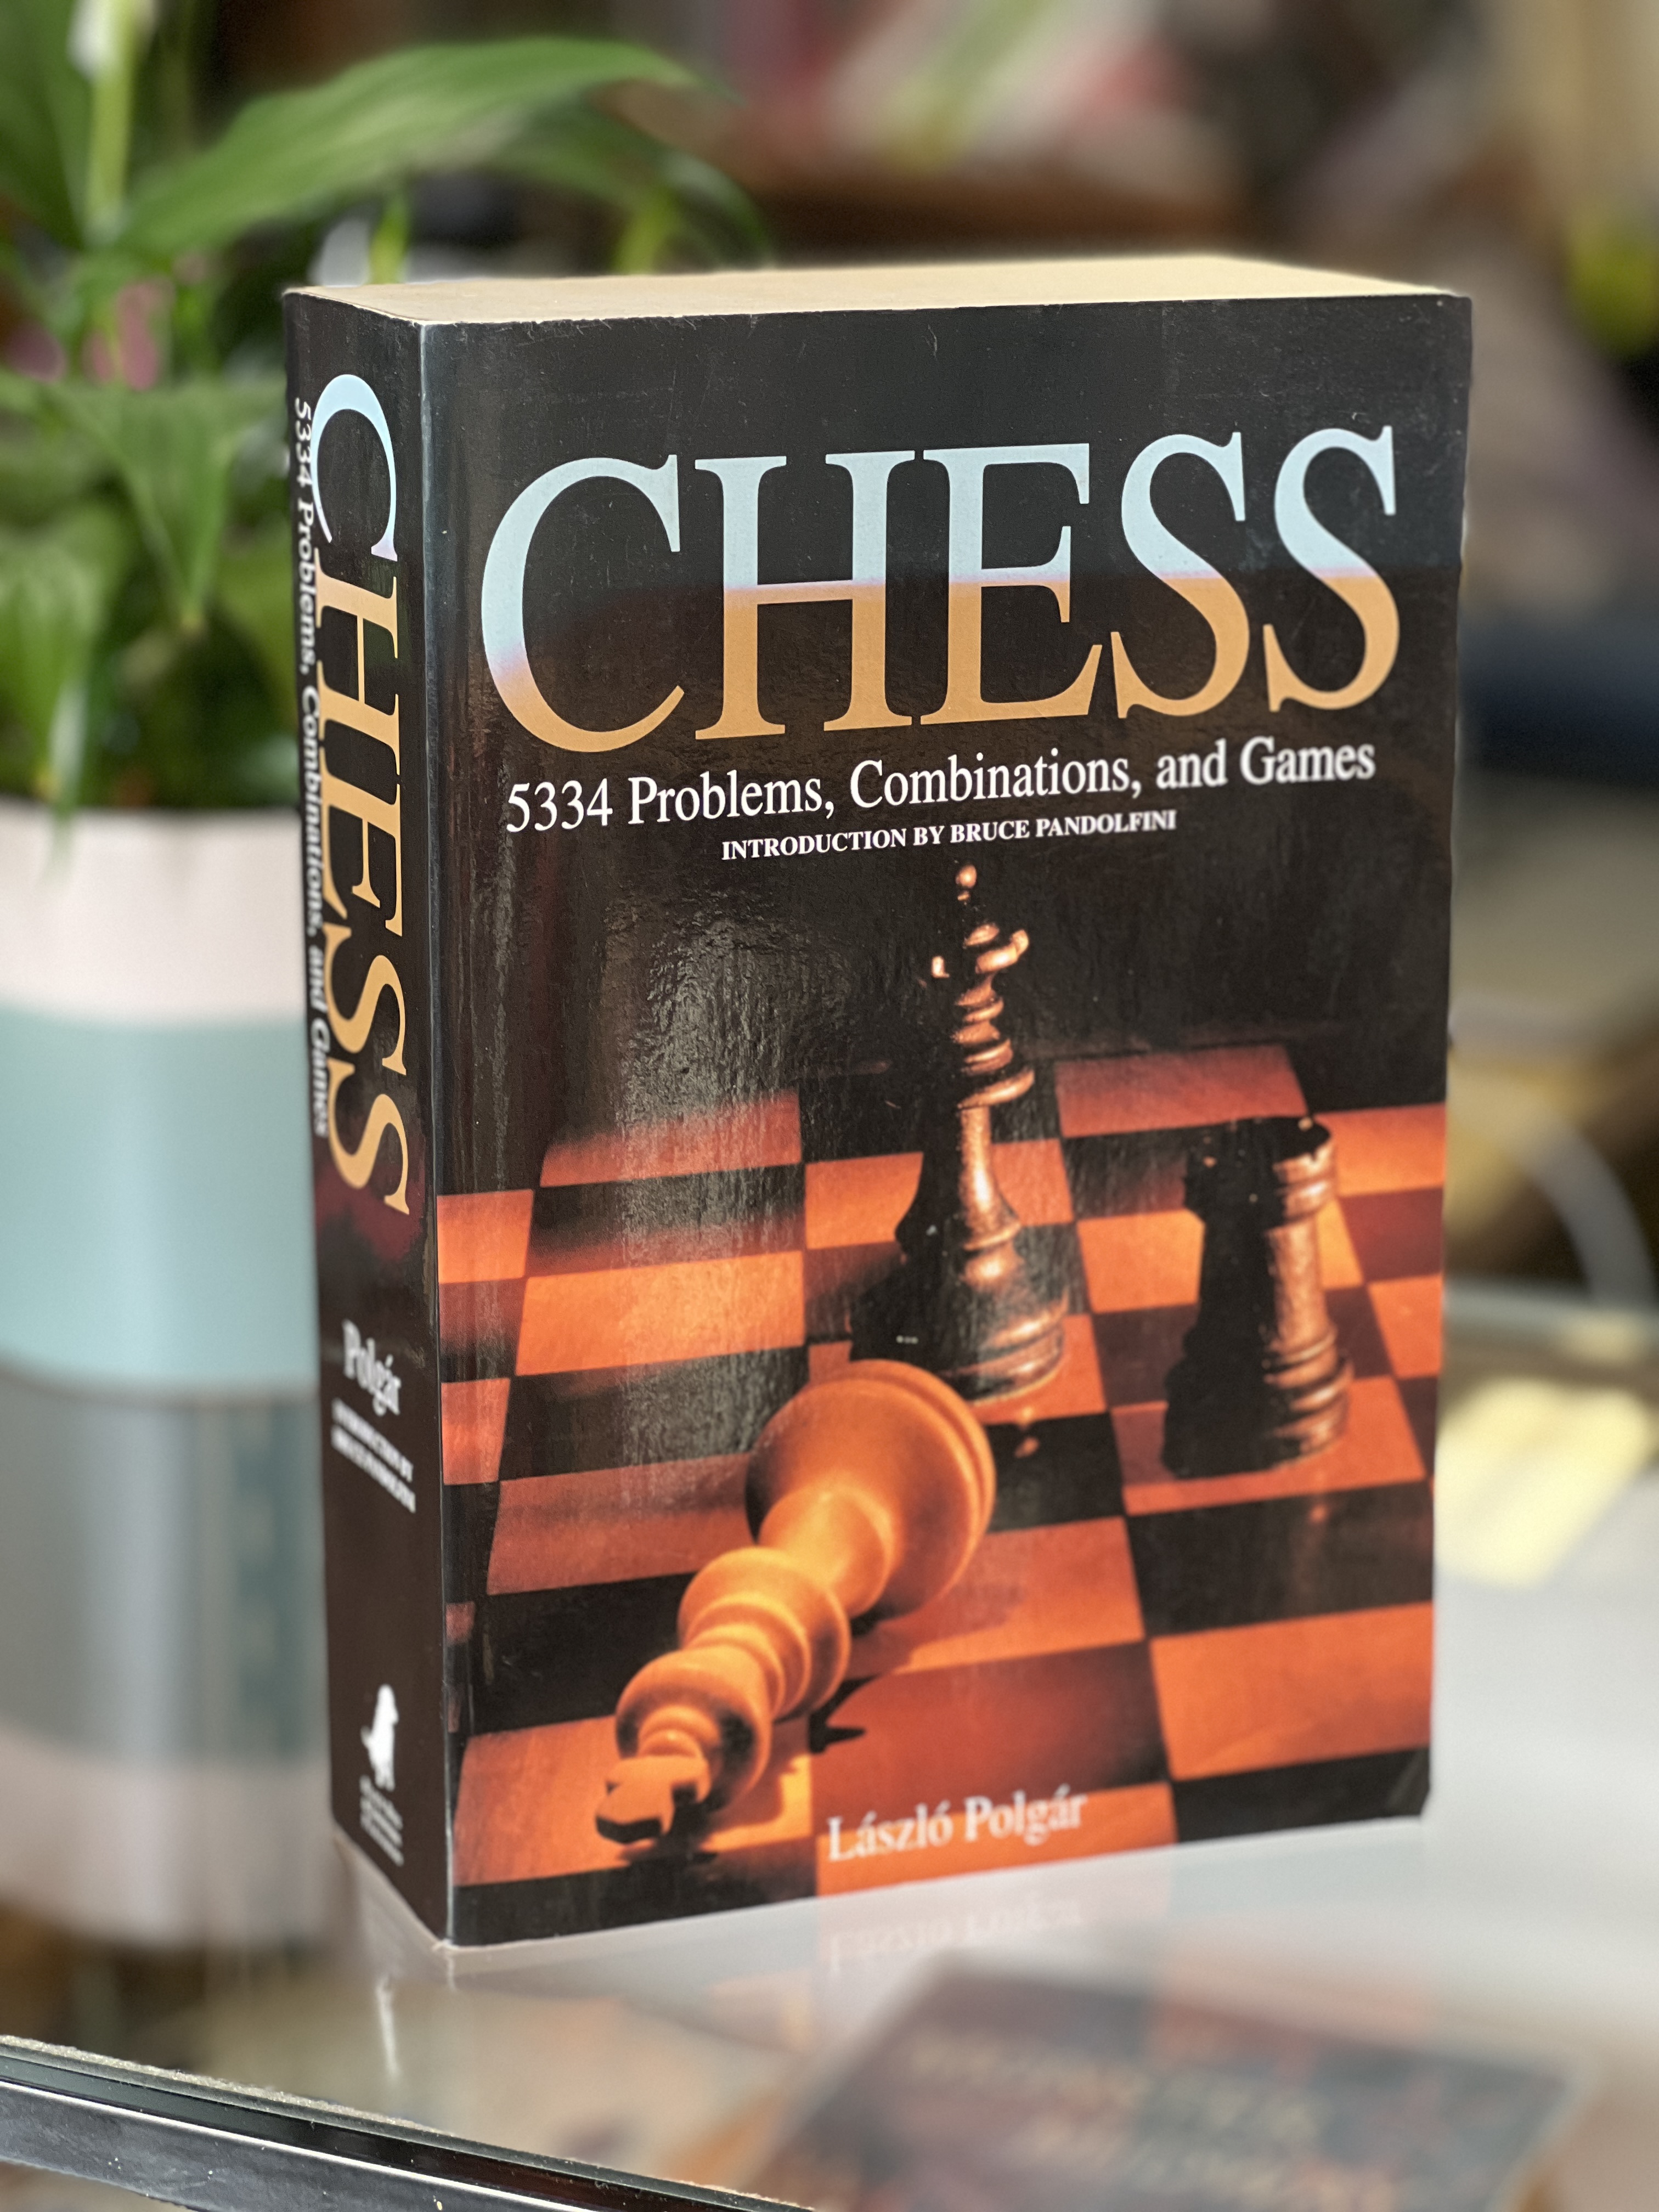 Image for "Chess 5334 Problems, Combinations, and Games"